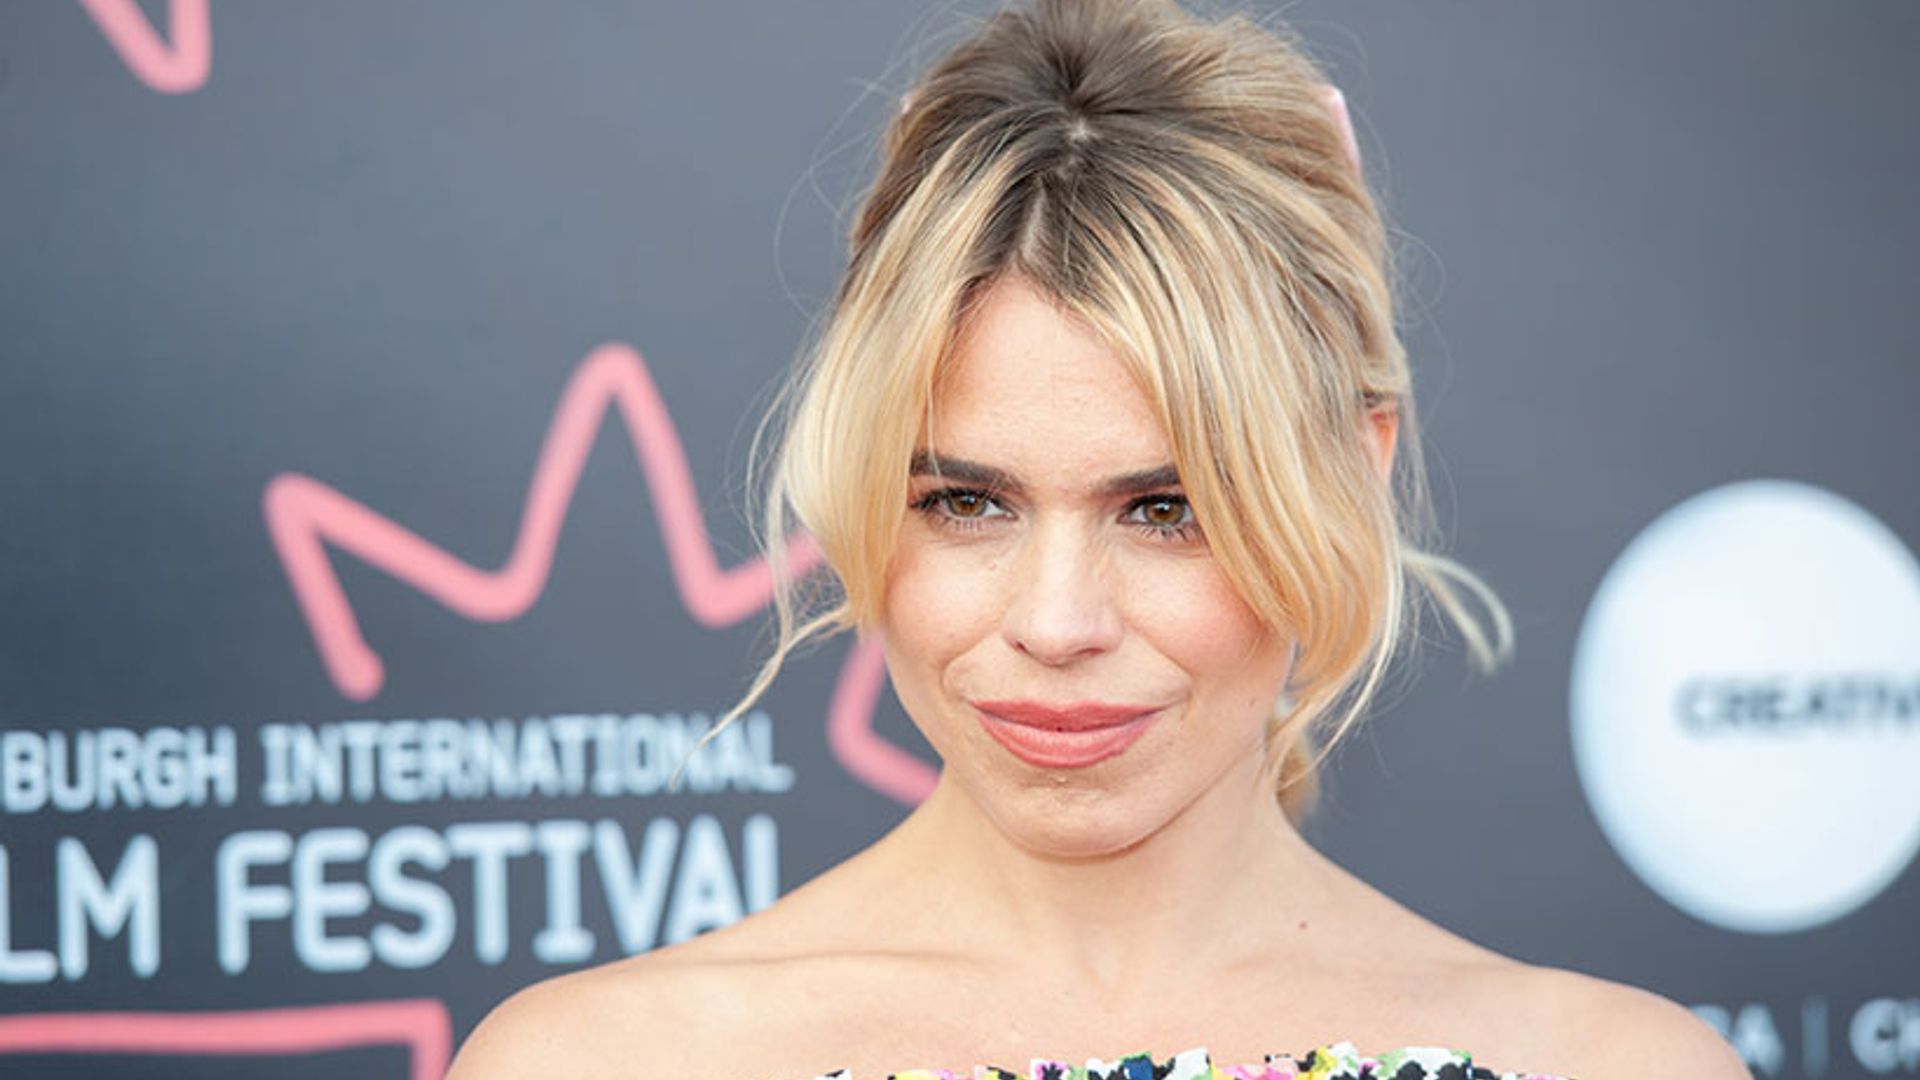 Billie Piper shares adorable first picture of baby daughter - find out the cute name